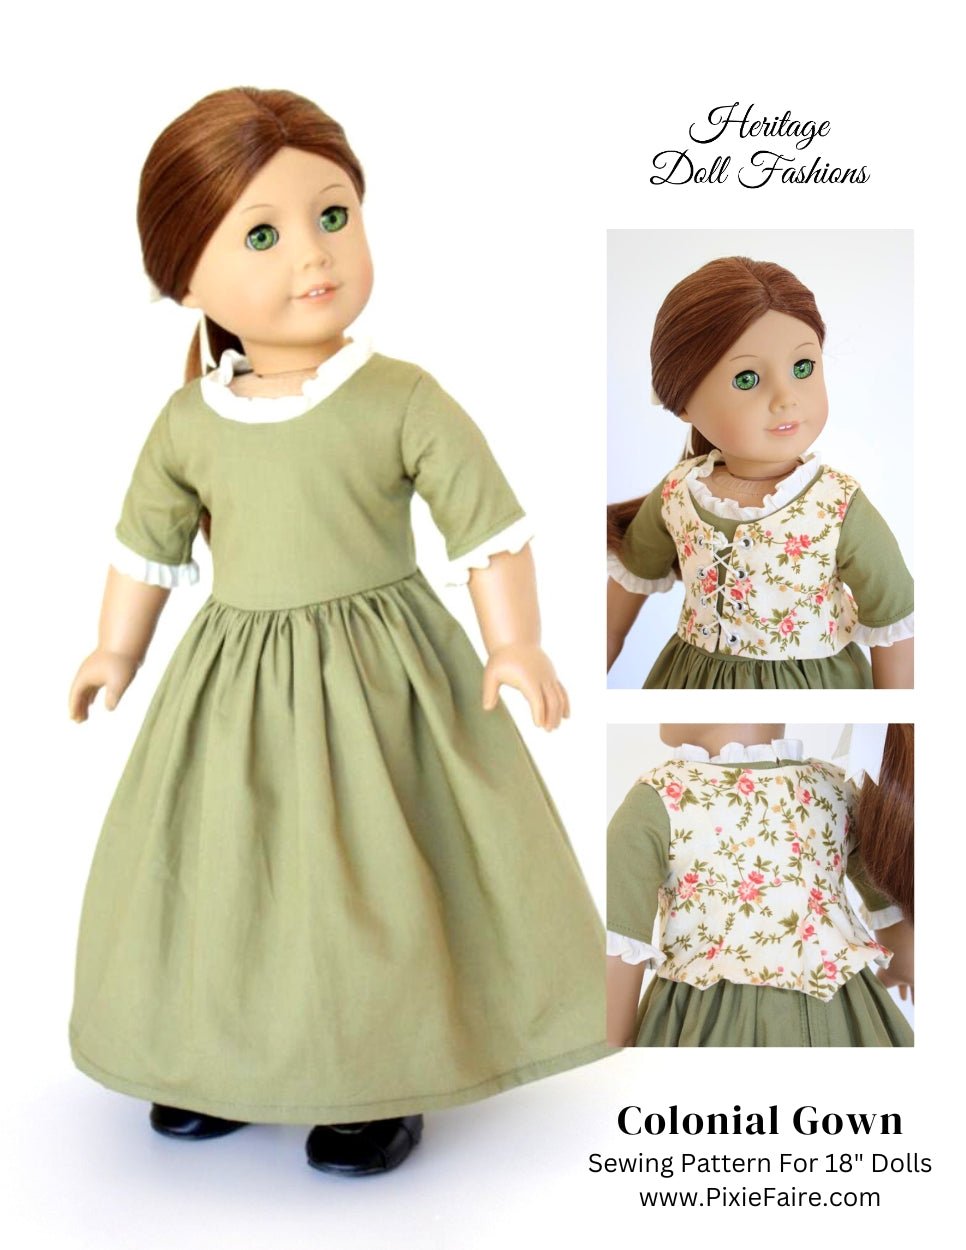 Cinderella Live Action Inspired 17″ Doll Gown – Erika Parra